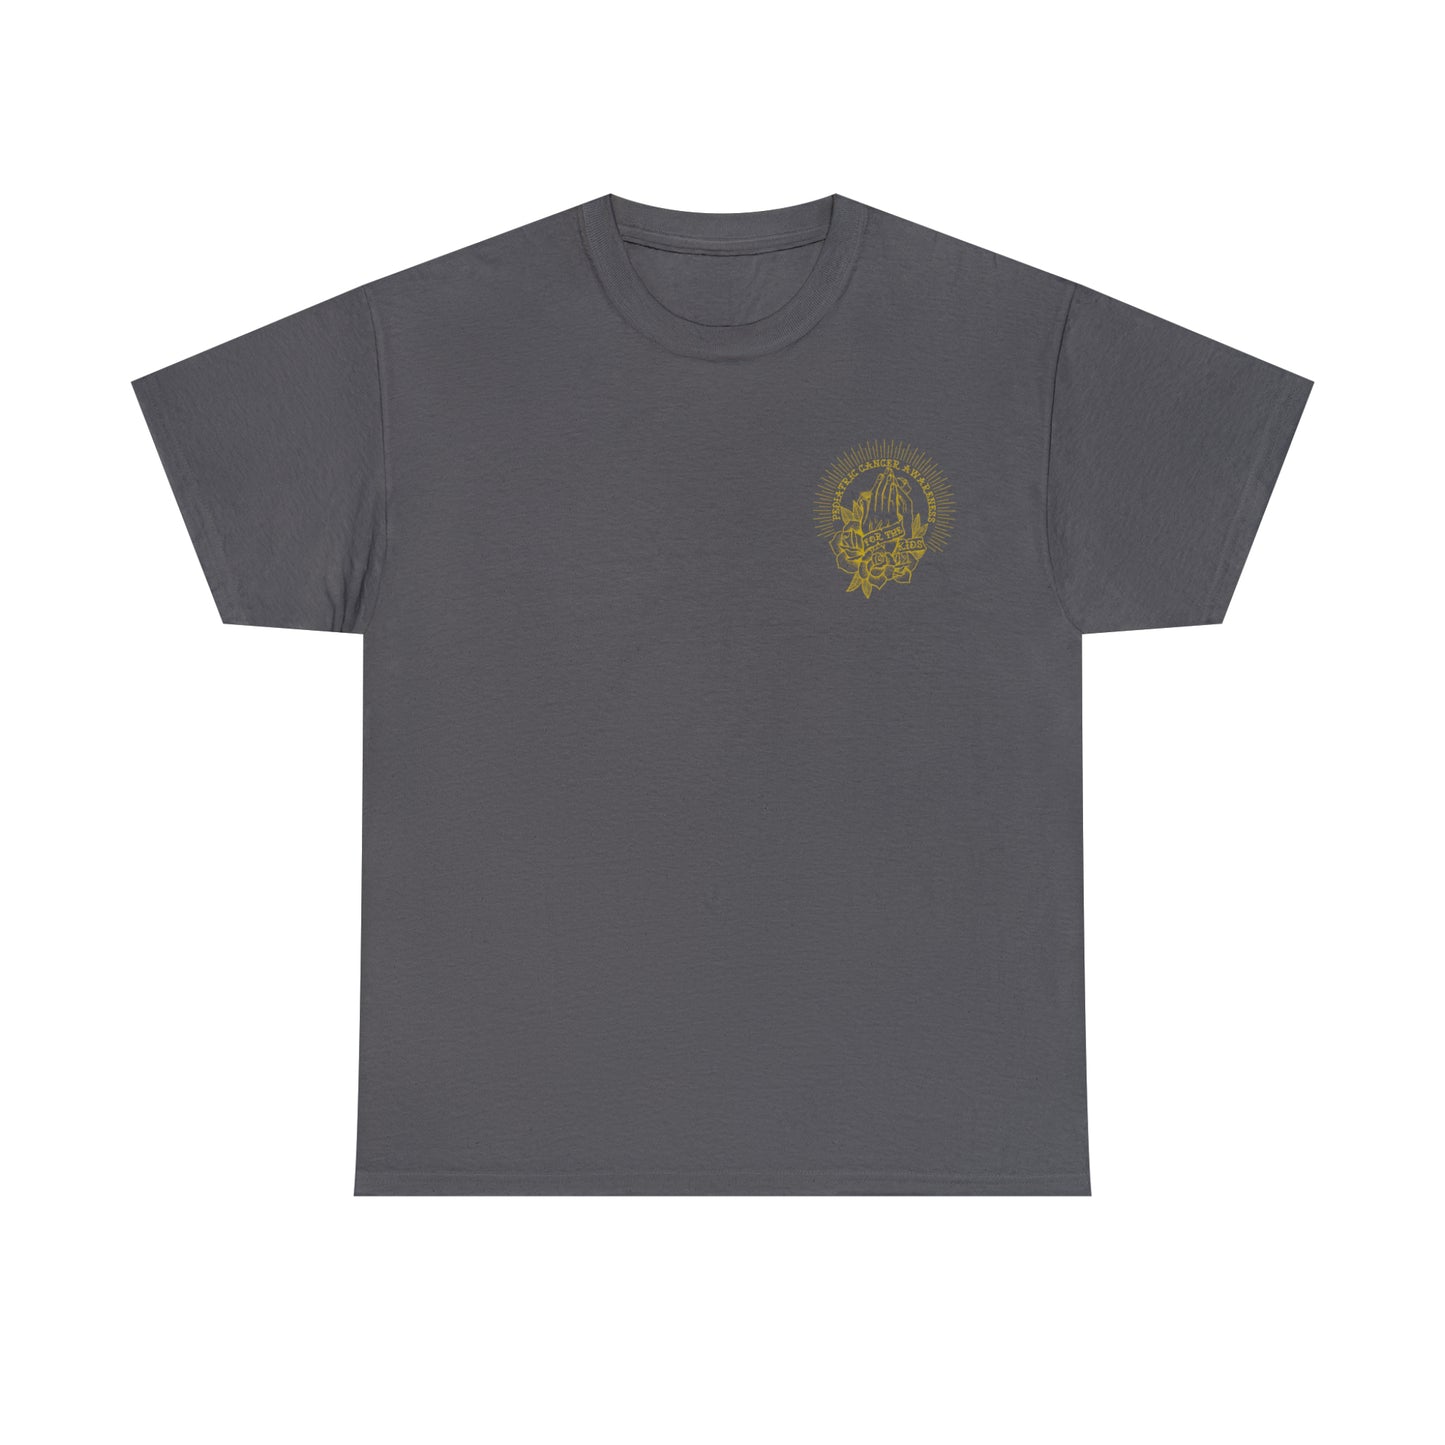 Pediatric Cancer Awareness - For The Kids Gold Logo Unisex Heavy Cotton Tee